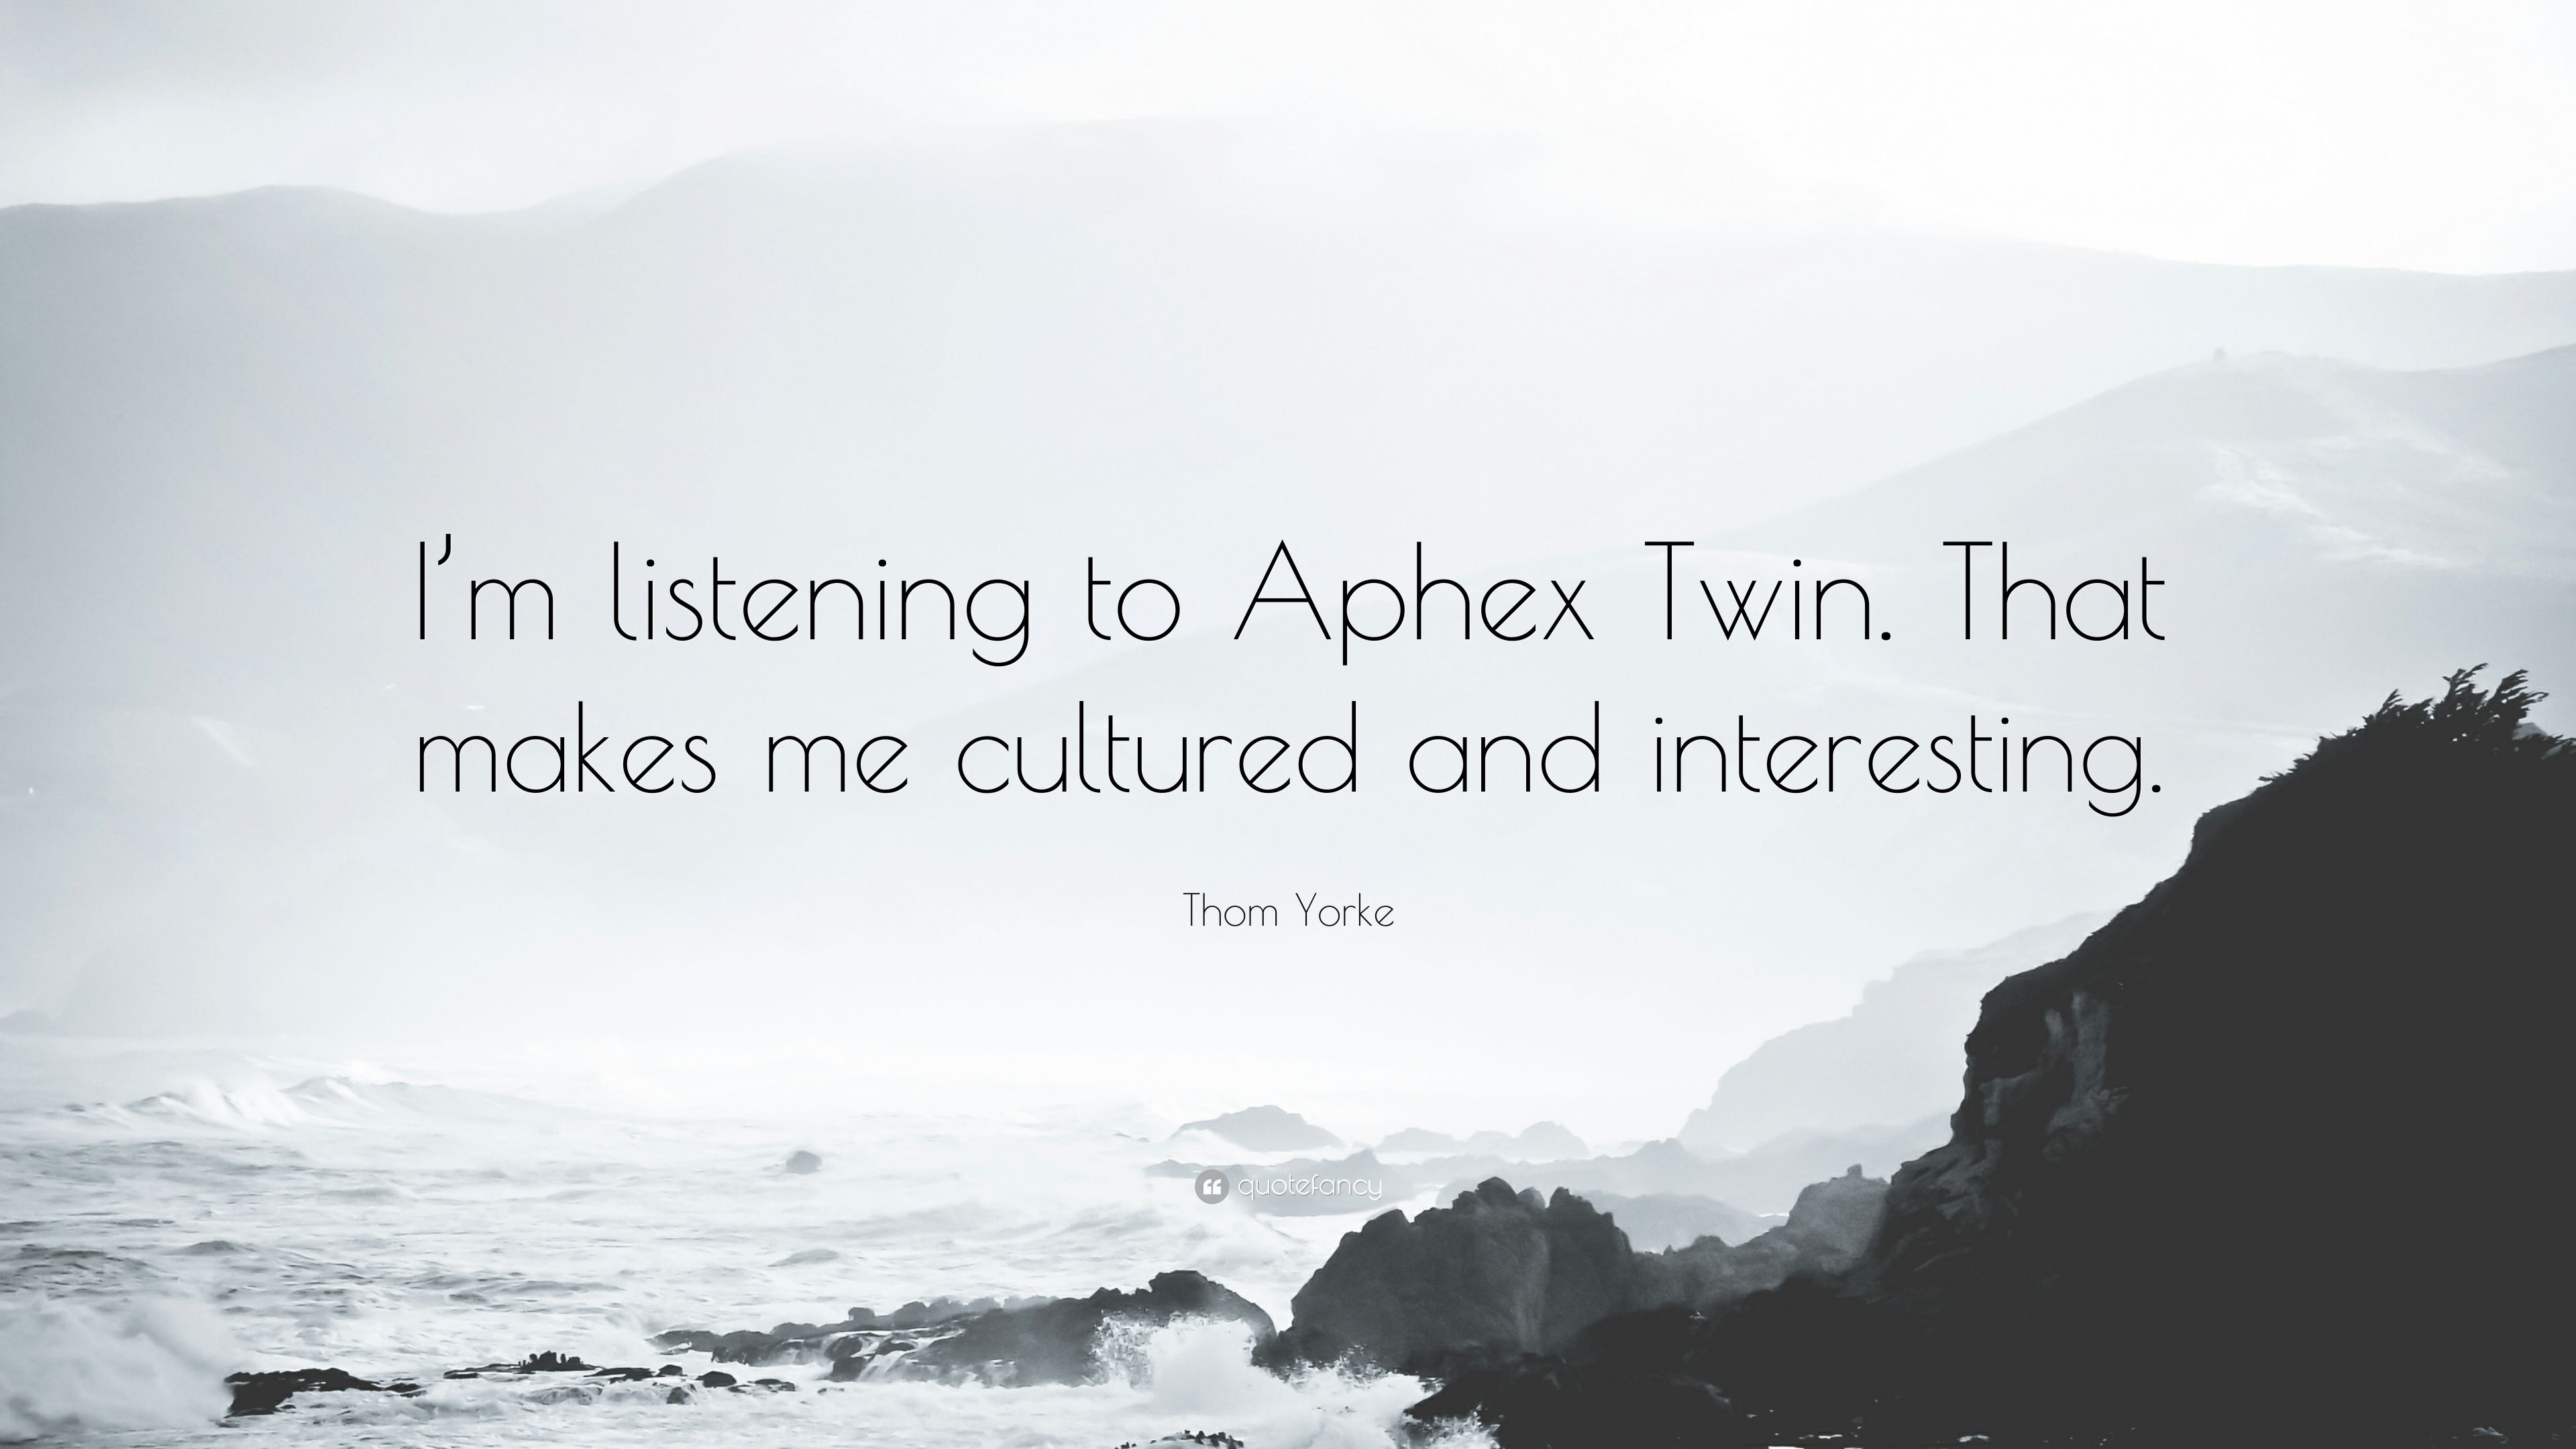 Thom Yorke Quote: “I'm listening to Aphex Twin. That makes me